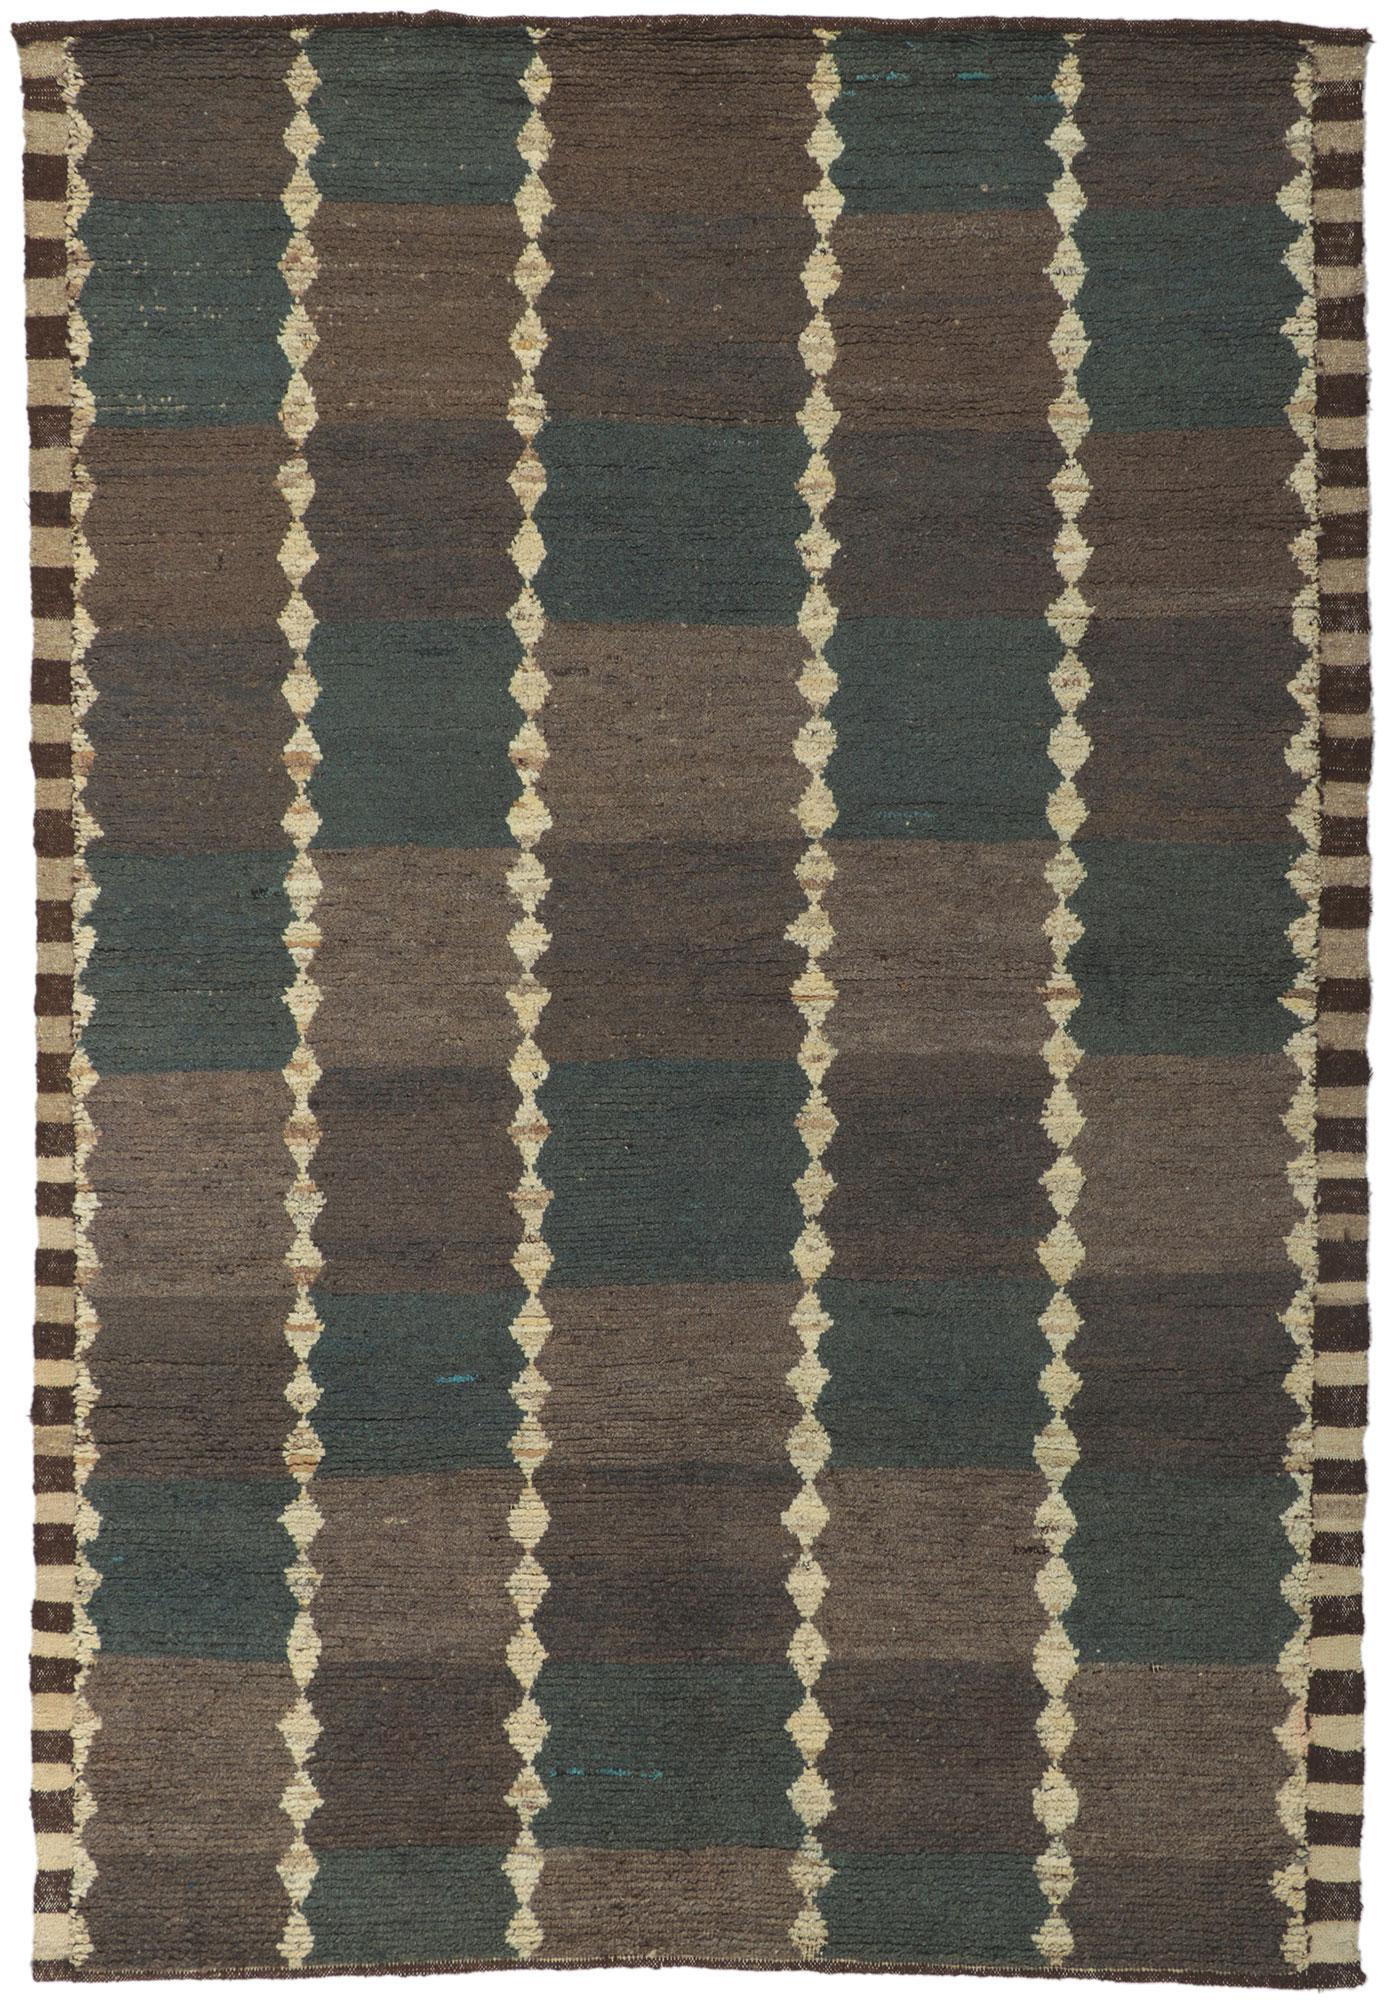 Earth-tone Checkered Moroccan Rug, Masculine Appeal Meets Midcentury Modern For Sale 2